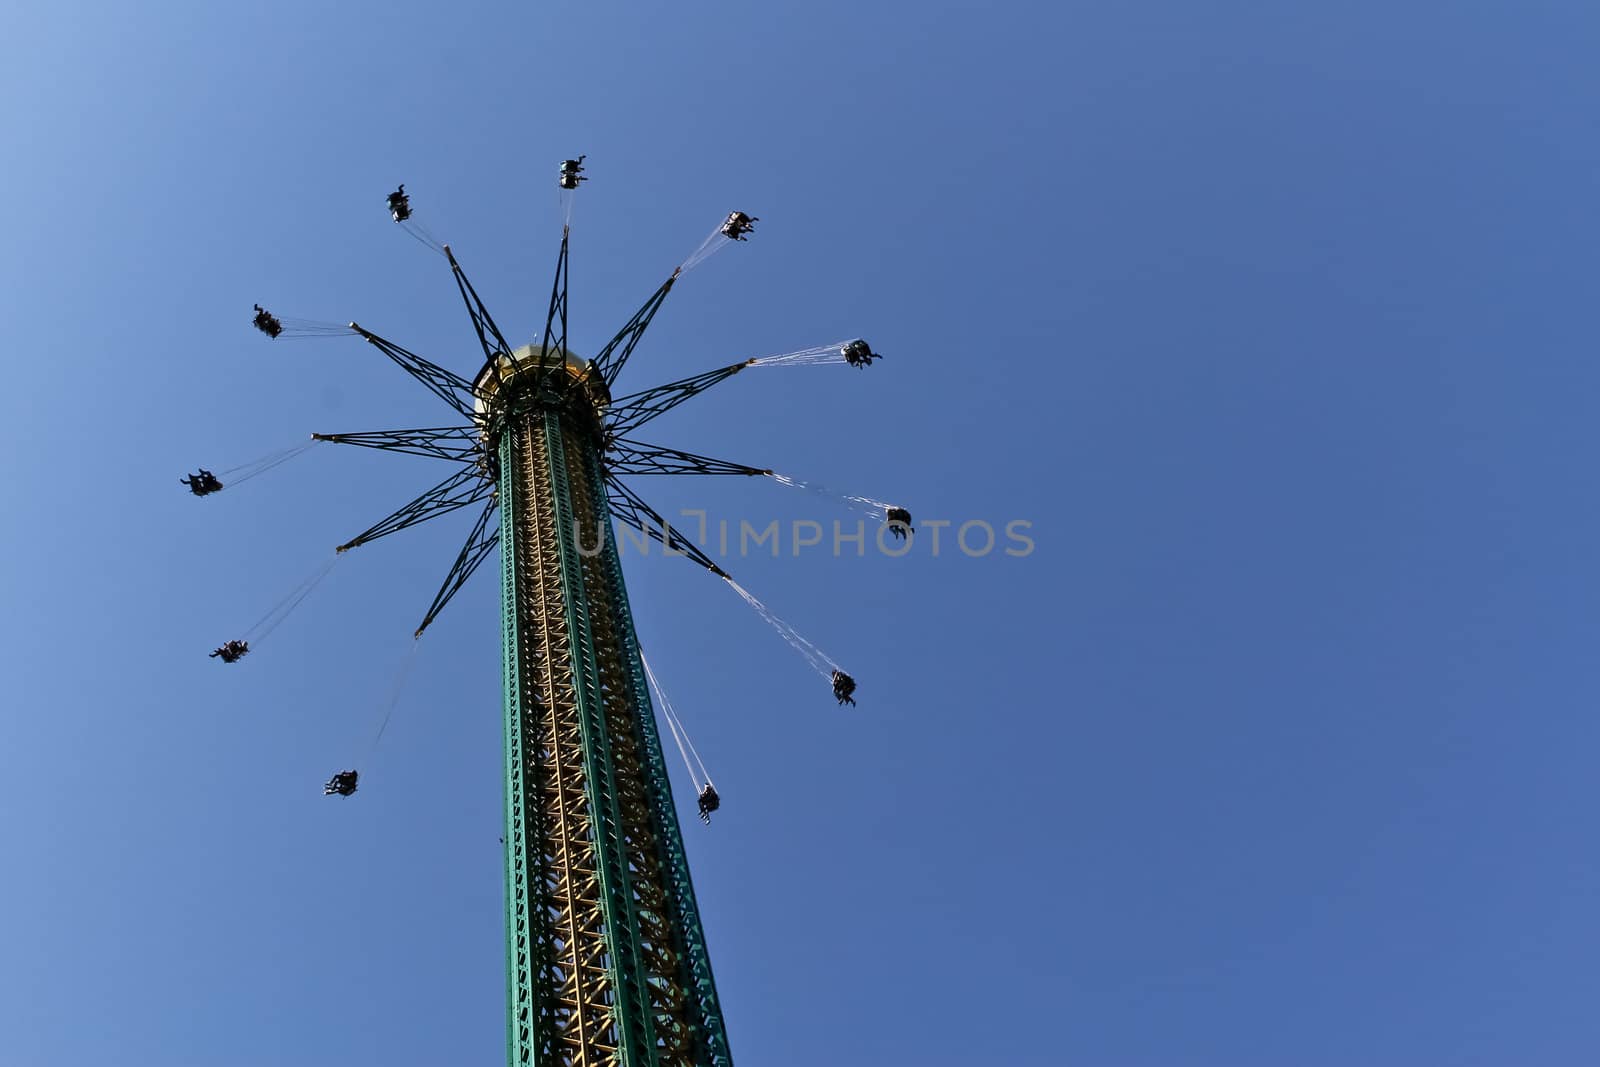 A carousel high up in the air in an amusement park in Vienna